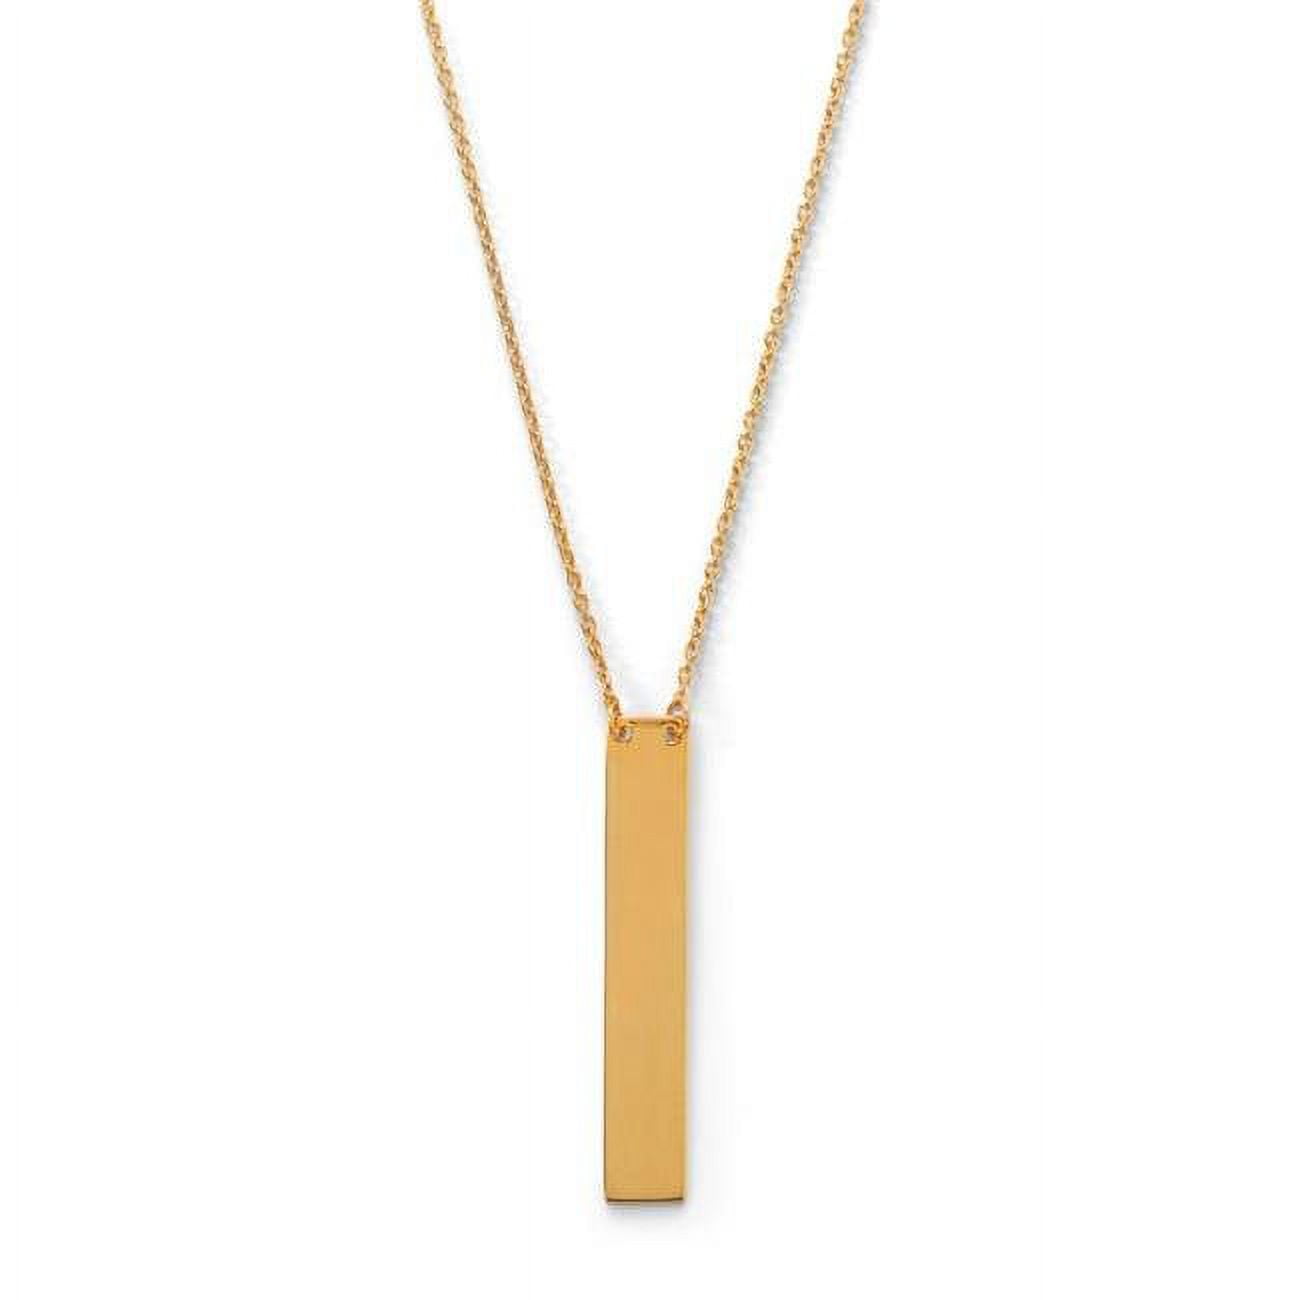 34257x 14k Yellow Gold Plated Sterling Silver Vertical Bar Necklace